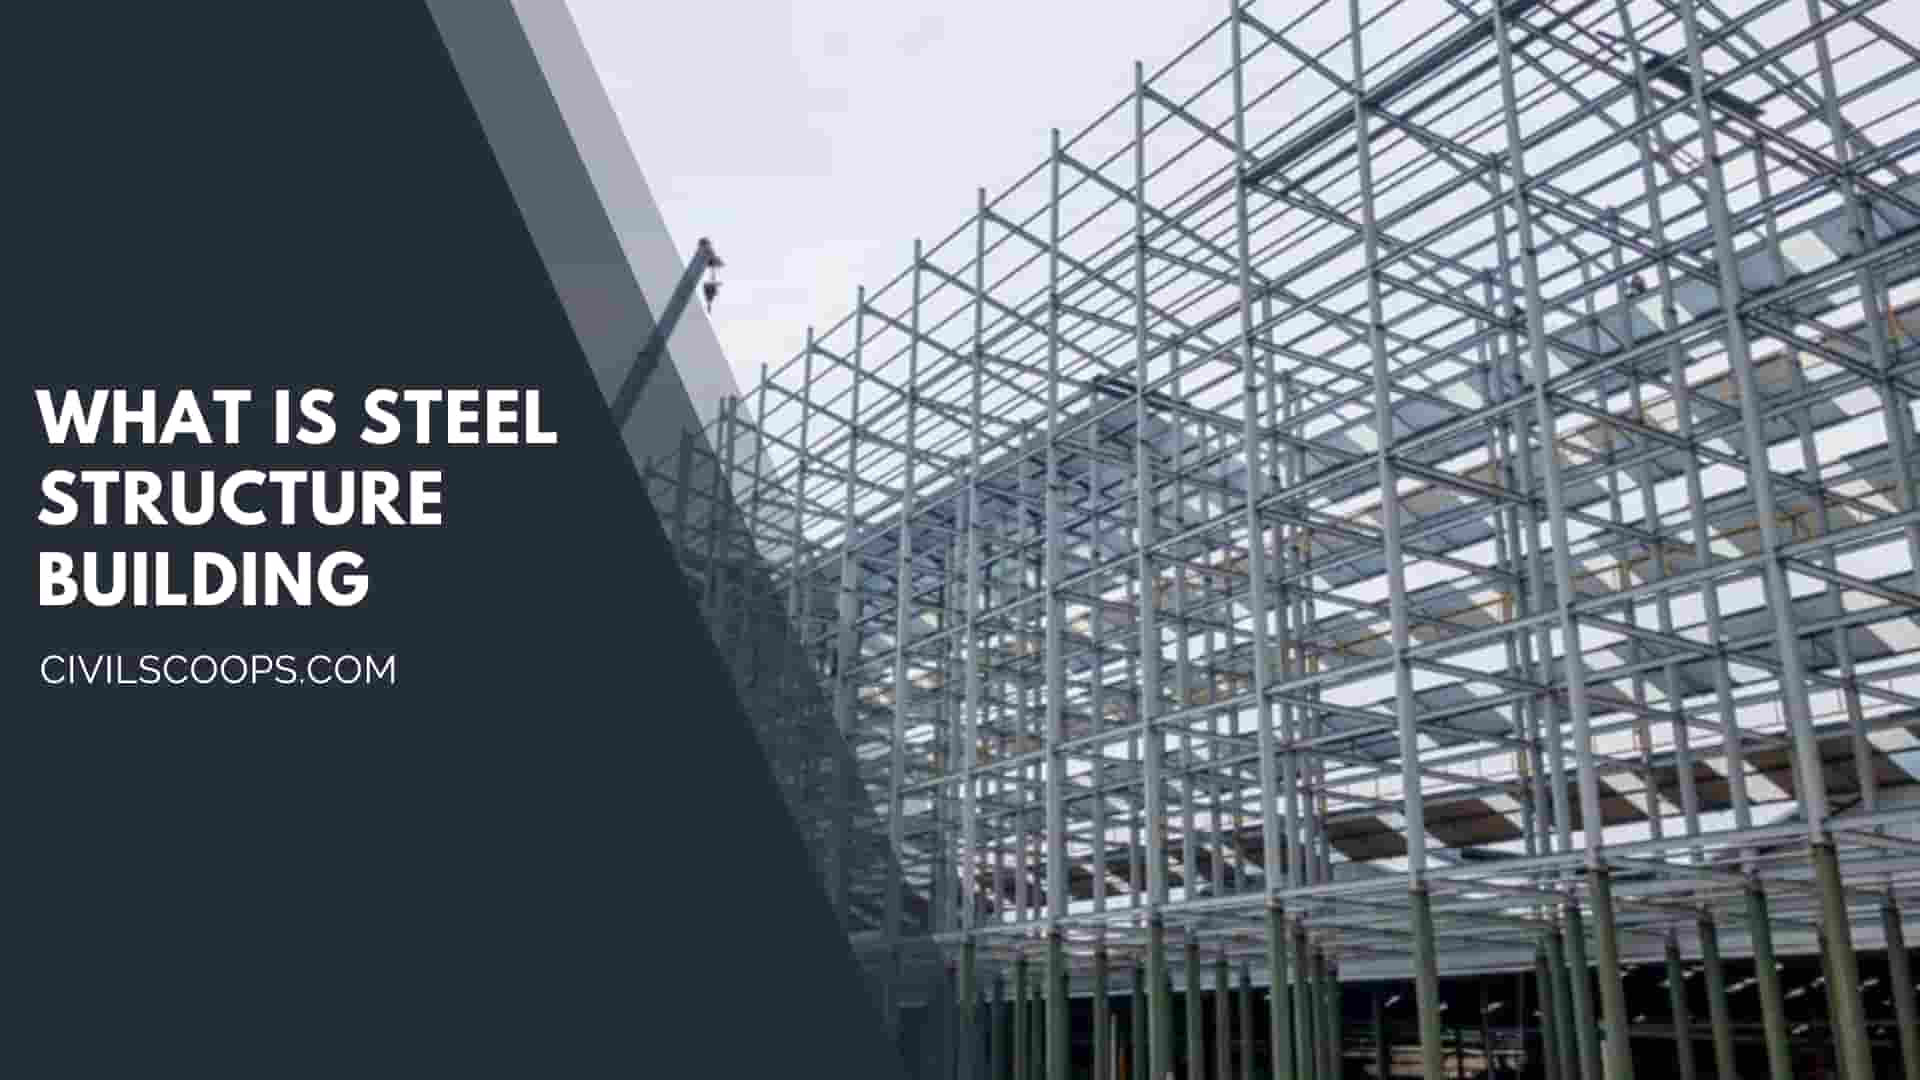 WHAT IS STEEL SCTRUCTURE BUILDING